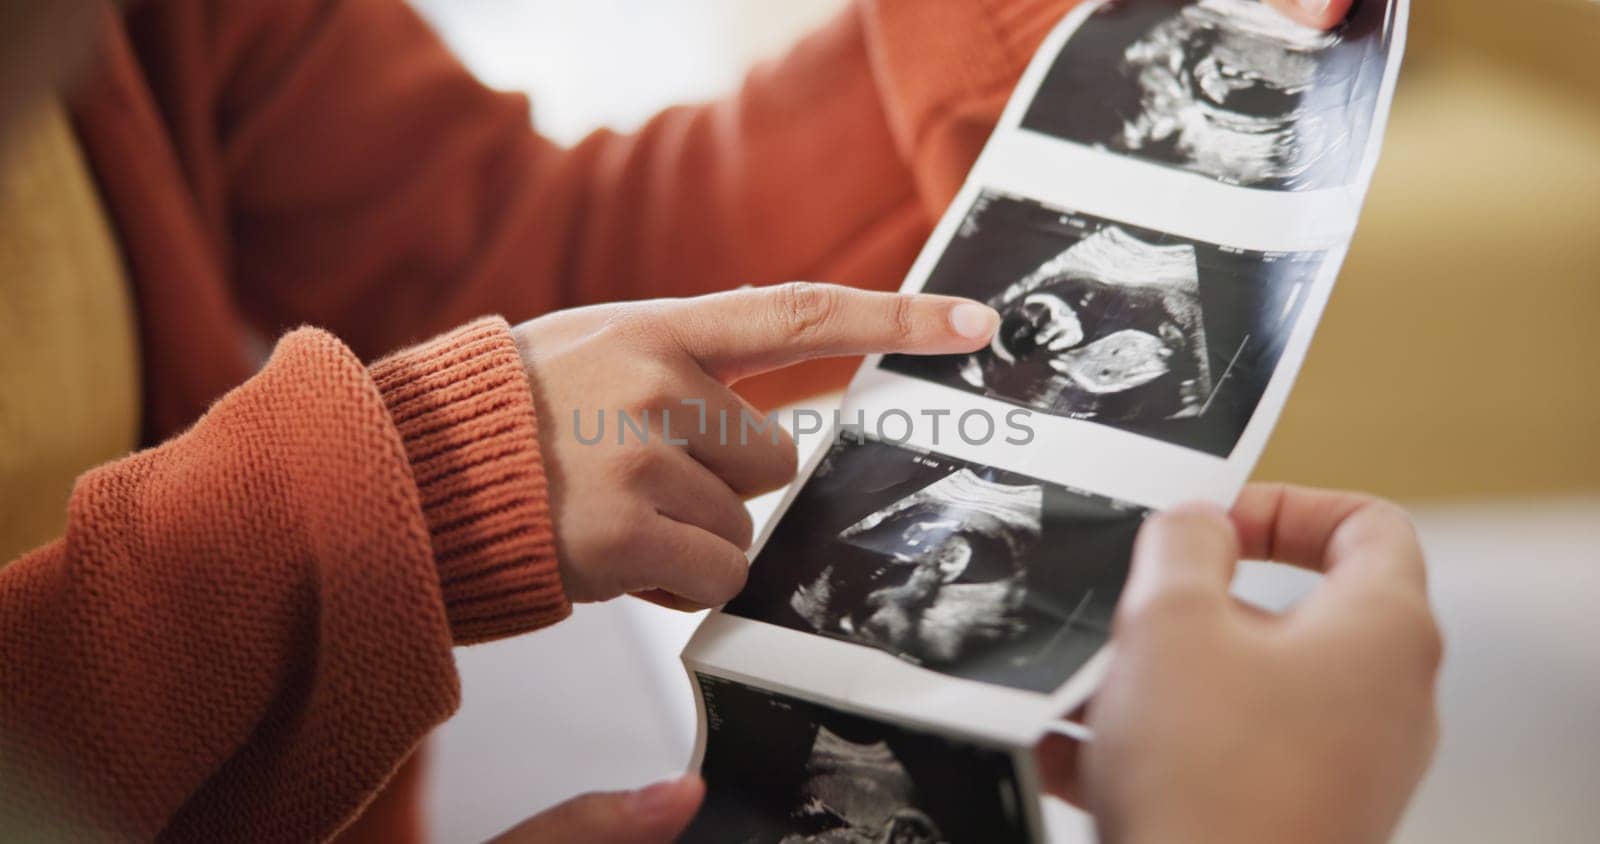 Ultrasound, surprise and ivf pregnancy with a gay couple in the living room of their home together for celebration. Wow, LGBT or lesbian with a woman and partner hugging while looking at a picture.